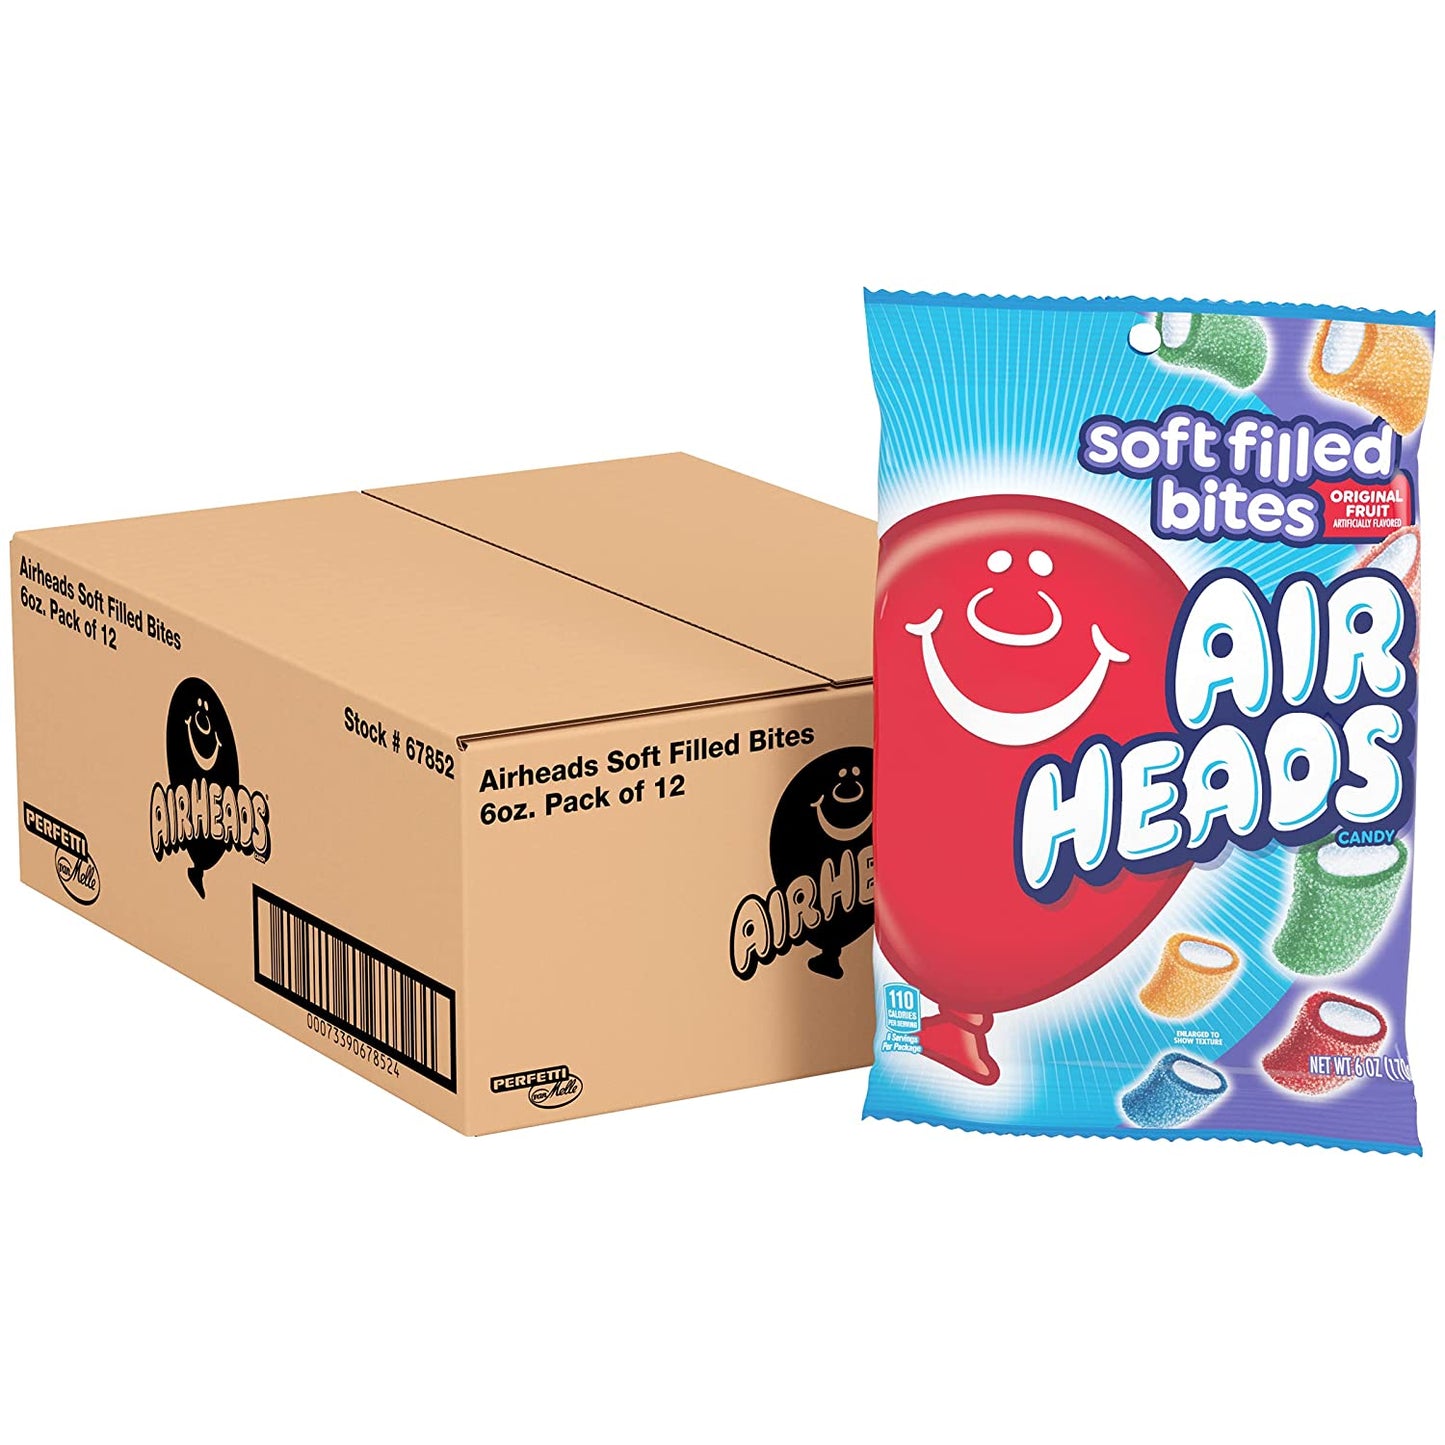 Airheads Soft Filled Bites, 6oz Bag, Box of 12 Bags